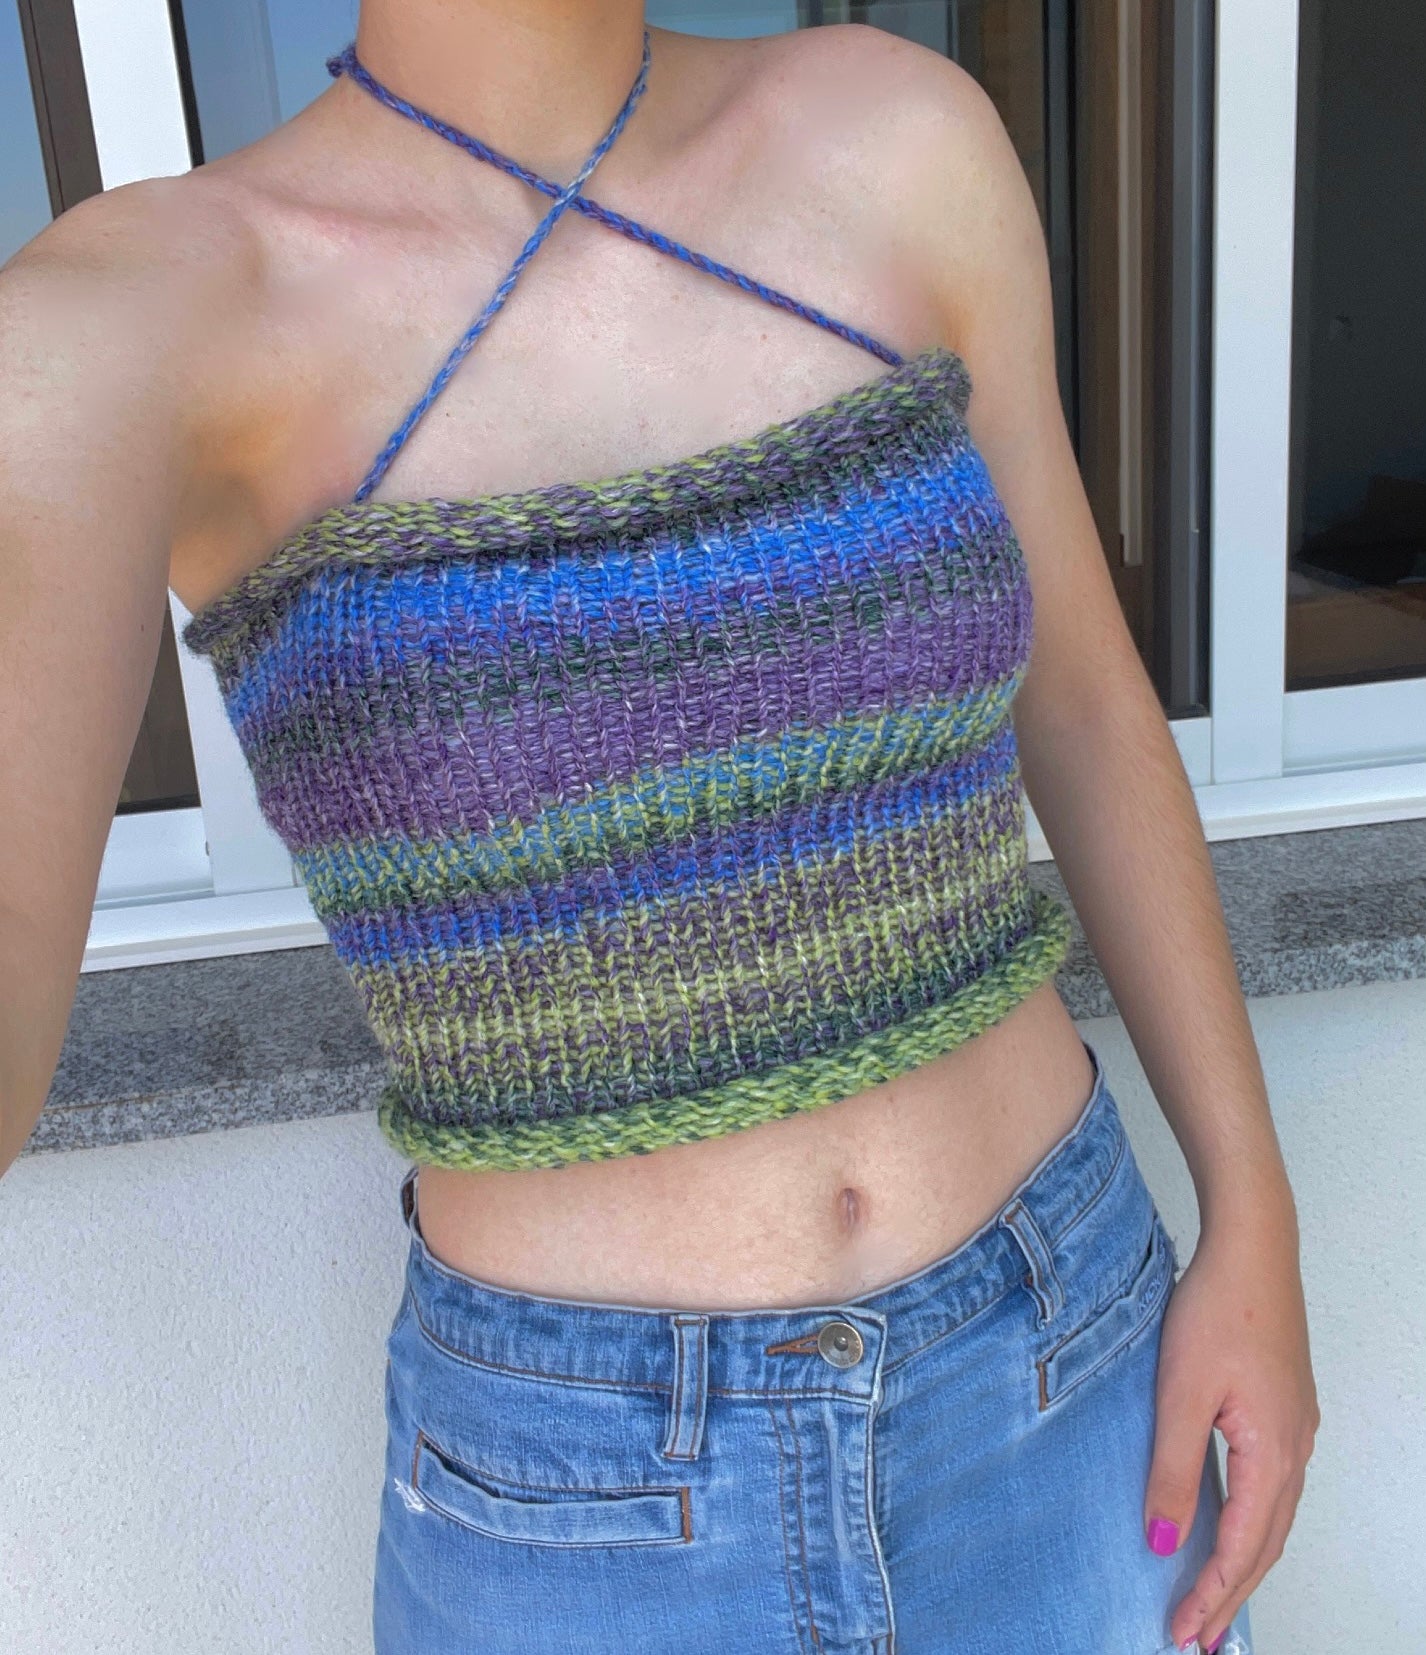 Handmade knitted criss cross halter top in purple, blue and green